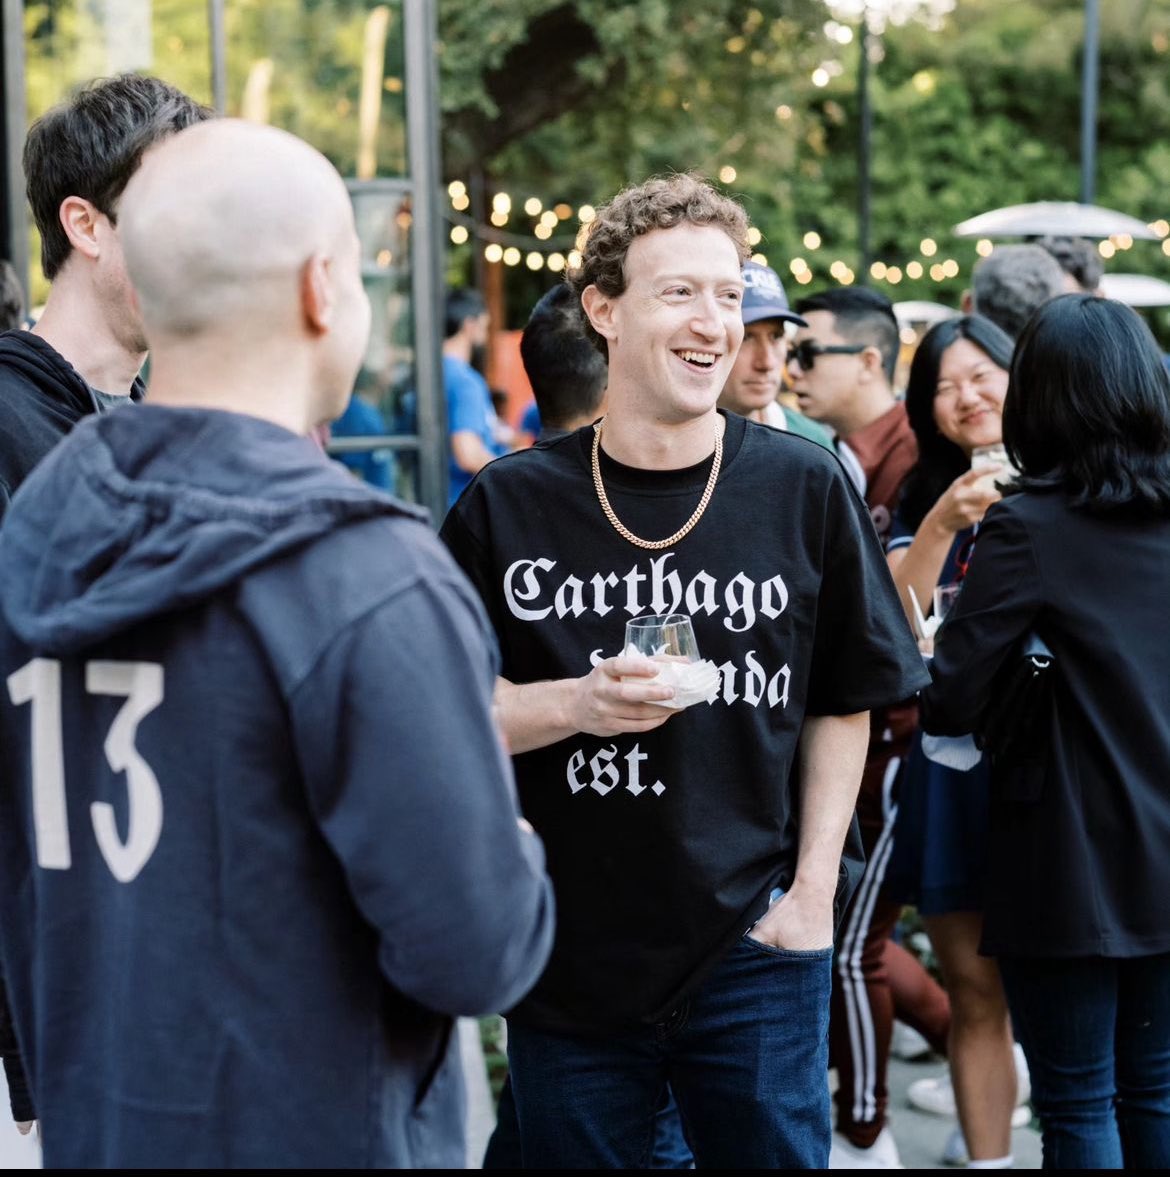 Zuck is going through all the stages every suburban Jewish kid goes through just in super slow motion.